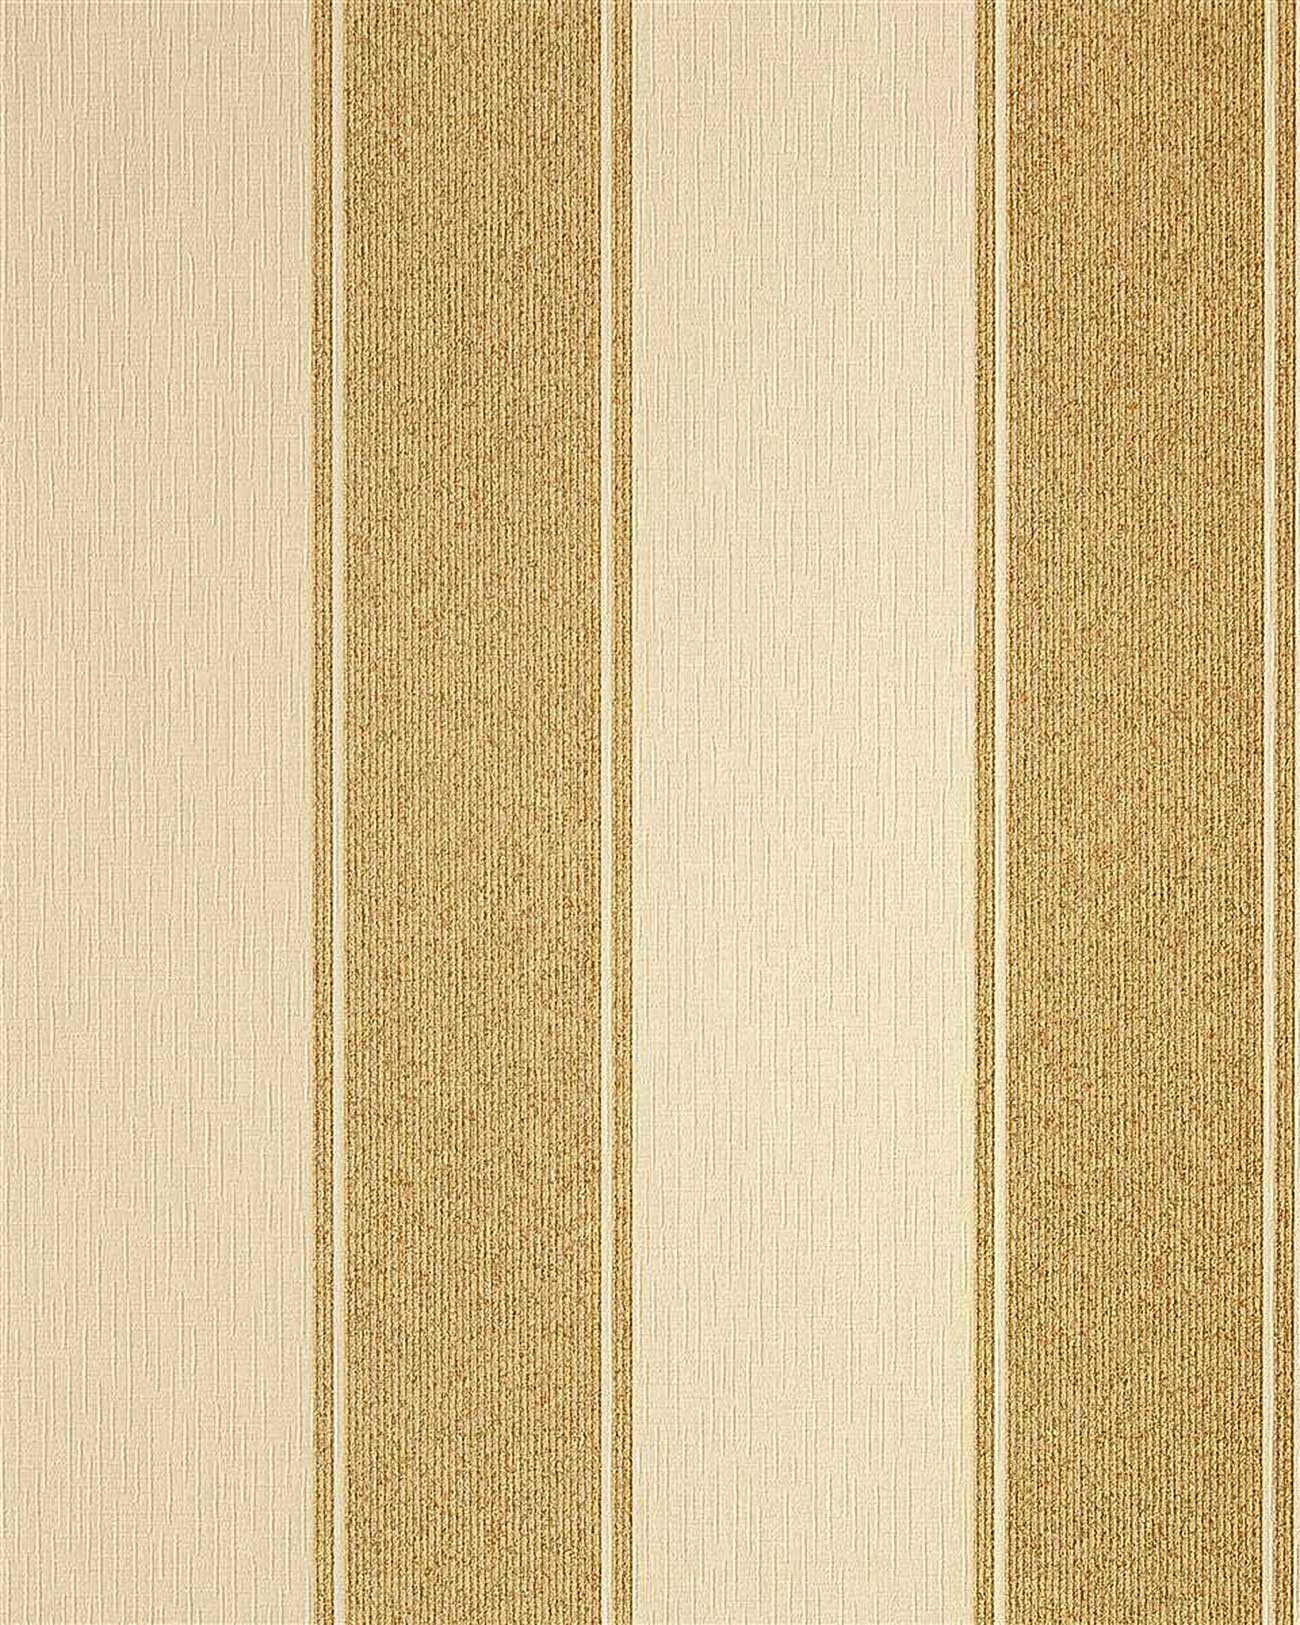 Beige And Gold Wallpaper - unminifycode